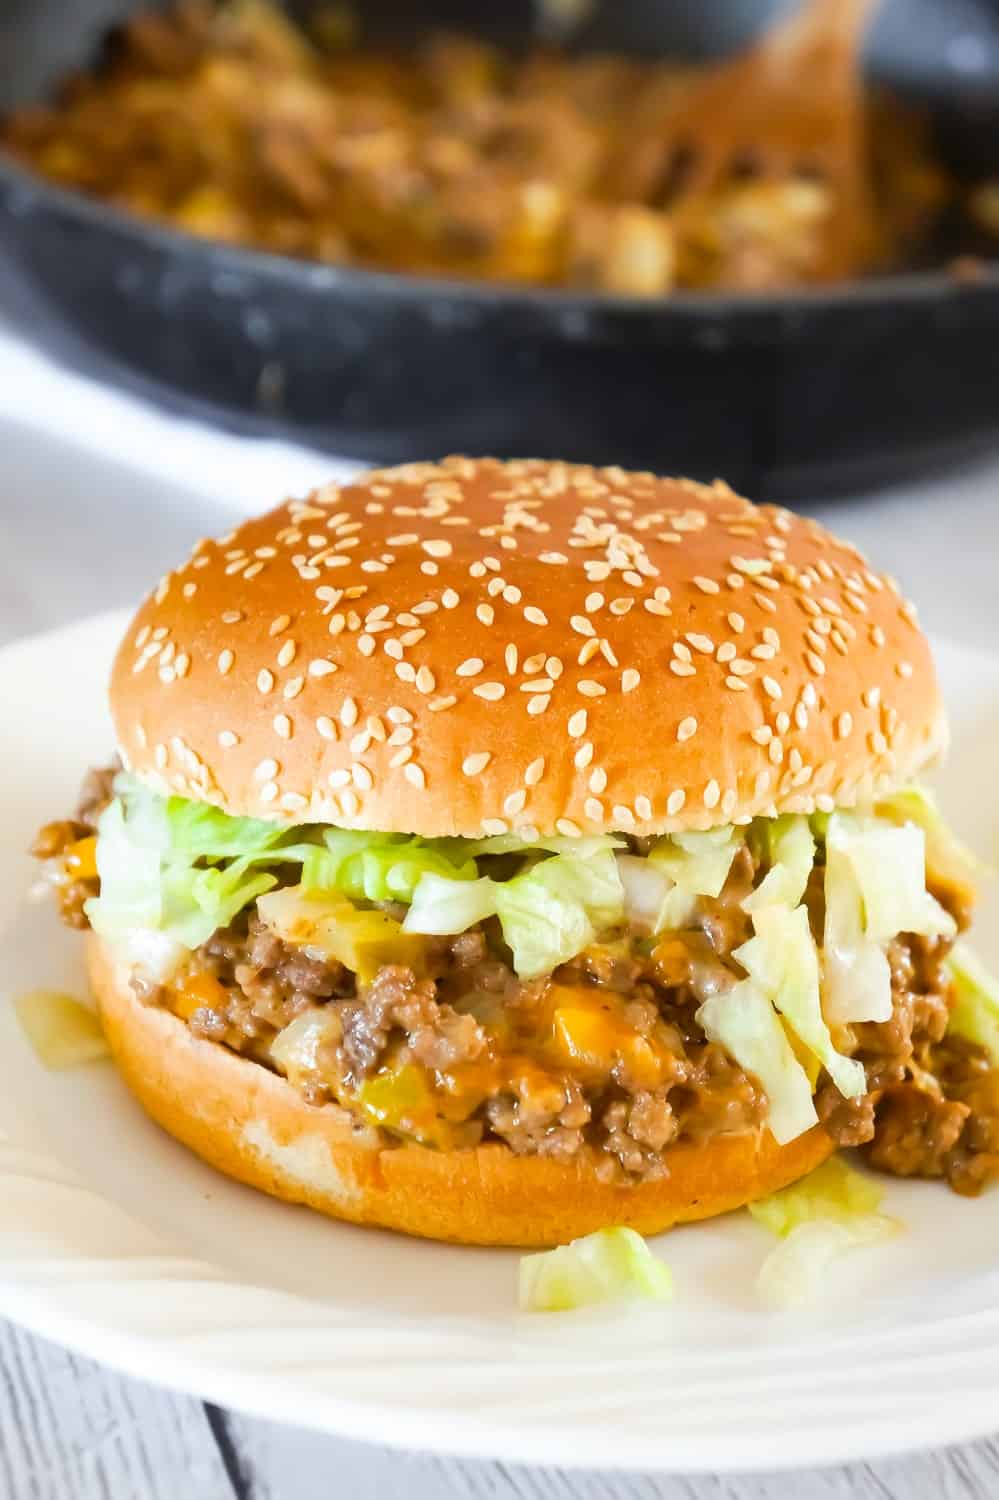 Big Mac Sloppy Joes are an easy ground beef dinner recipe perfect for weeknights. These sloppy joes are loaded with onions, pickles and cheddar cheese all tossed in a copycat Big Mac Sauce.